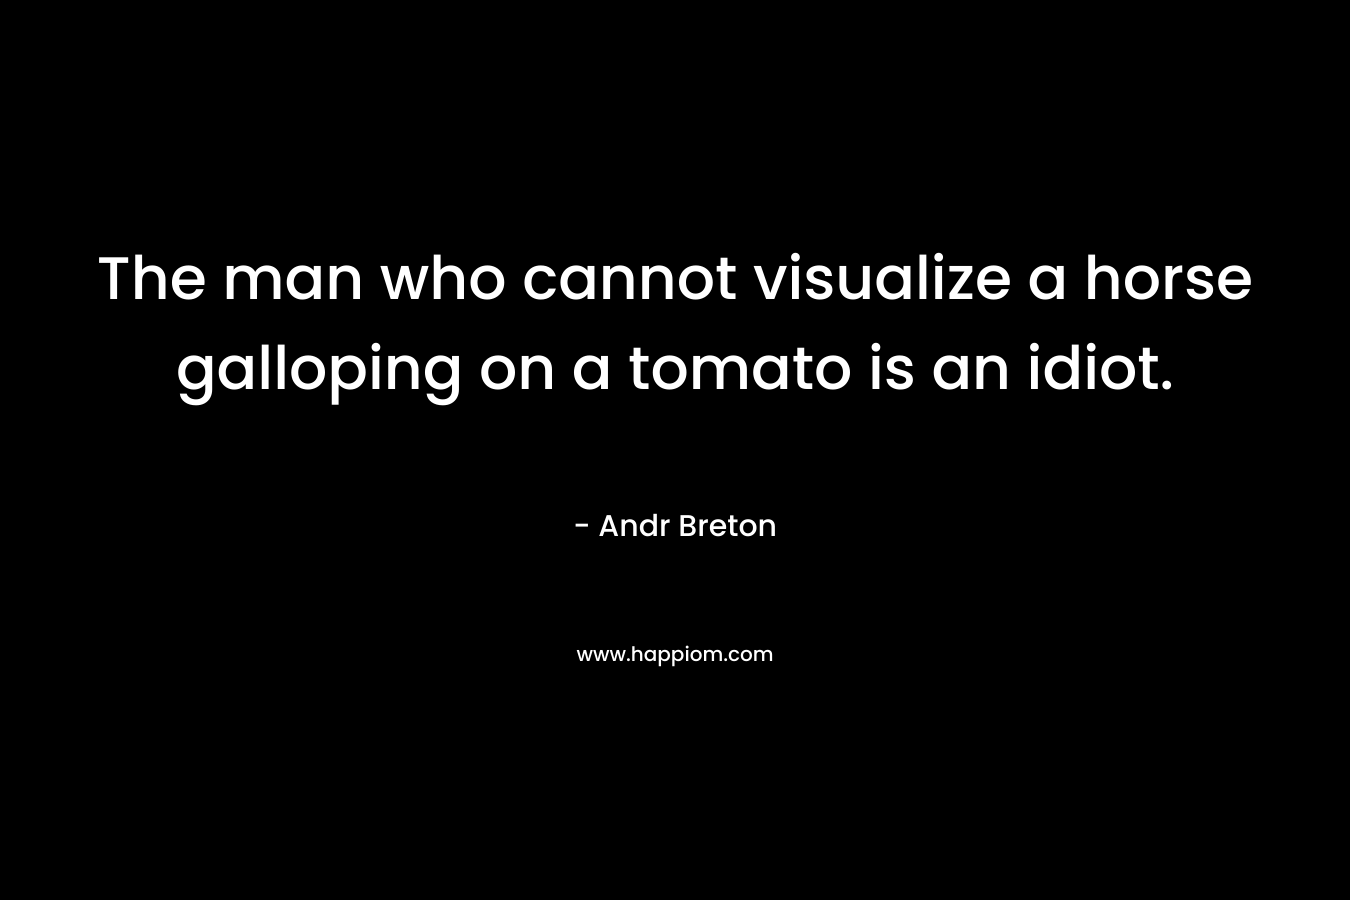 The man who cannot visualize a horse galloping on a tomato is an idiot.